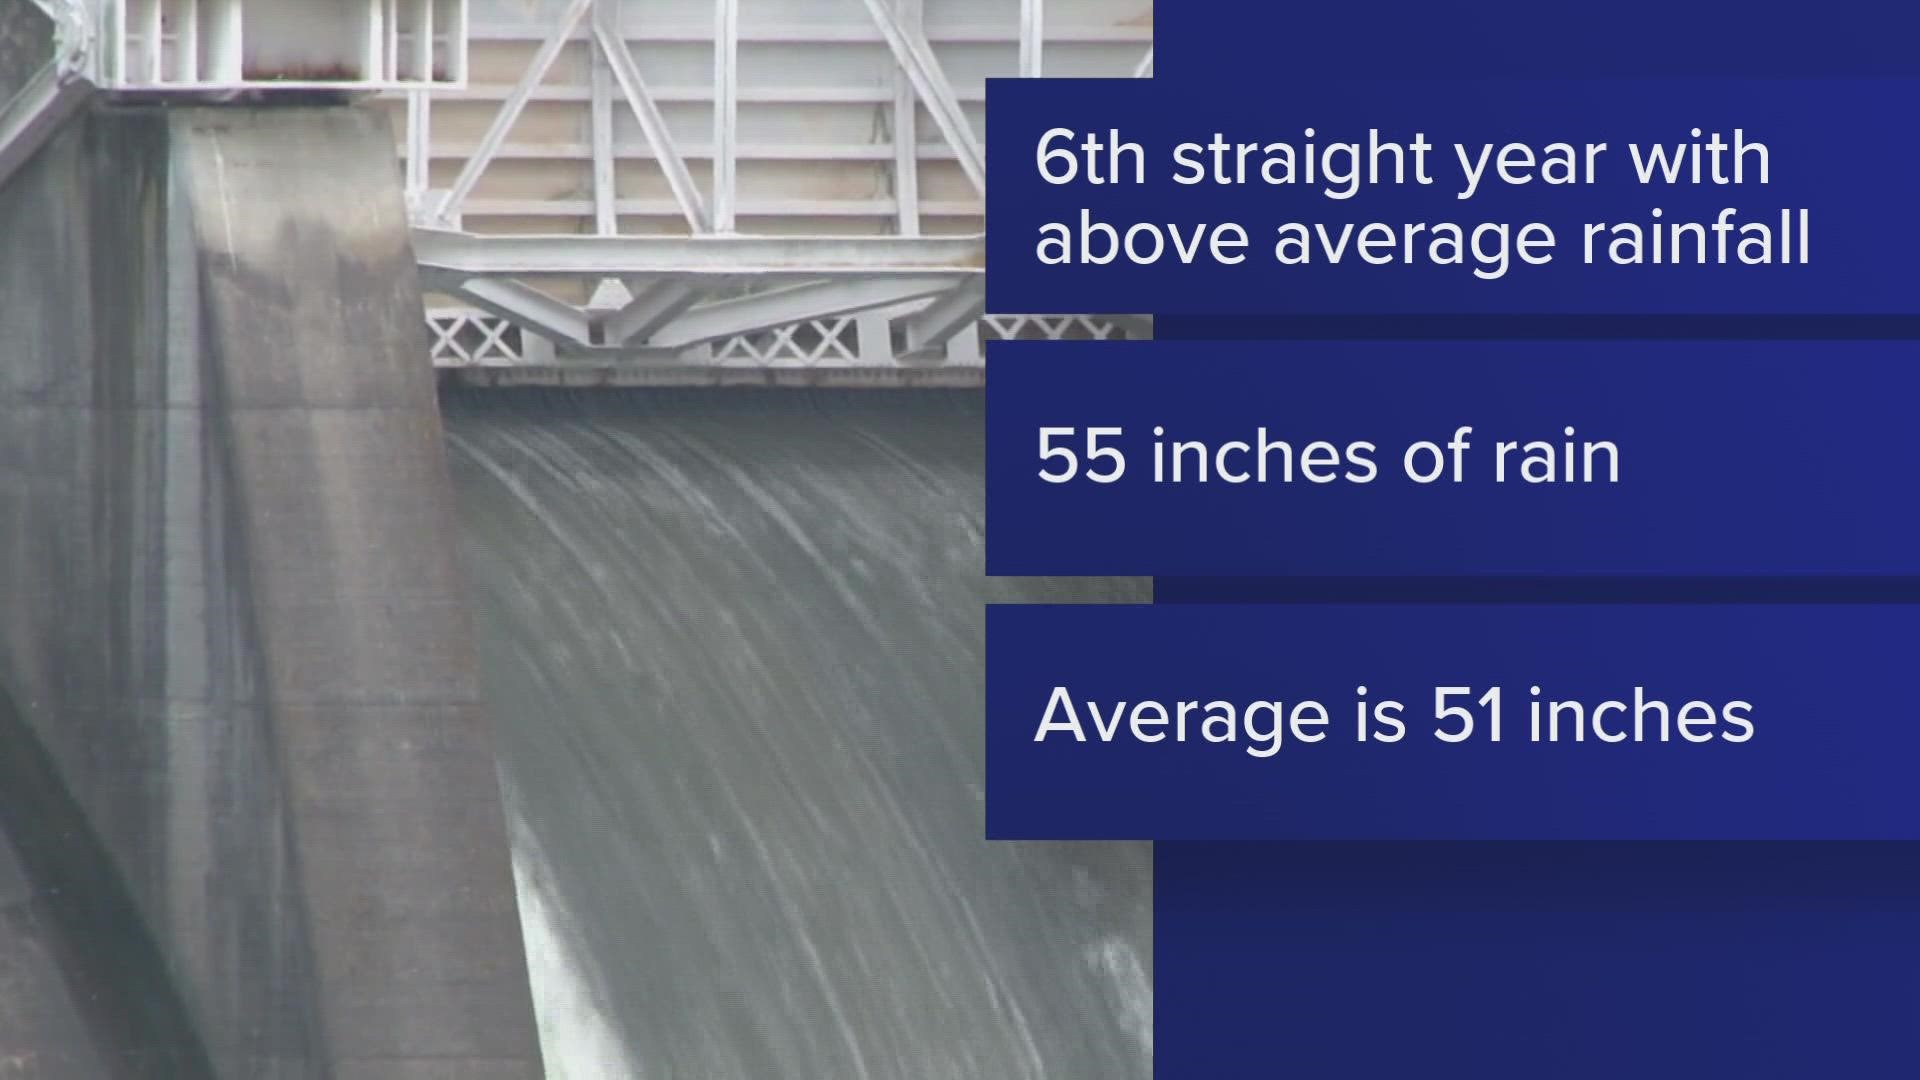 The TVA said around 55 inches of rain fell last year across the Tennessee River Basin. The average is 51 inches.